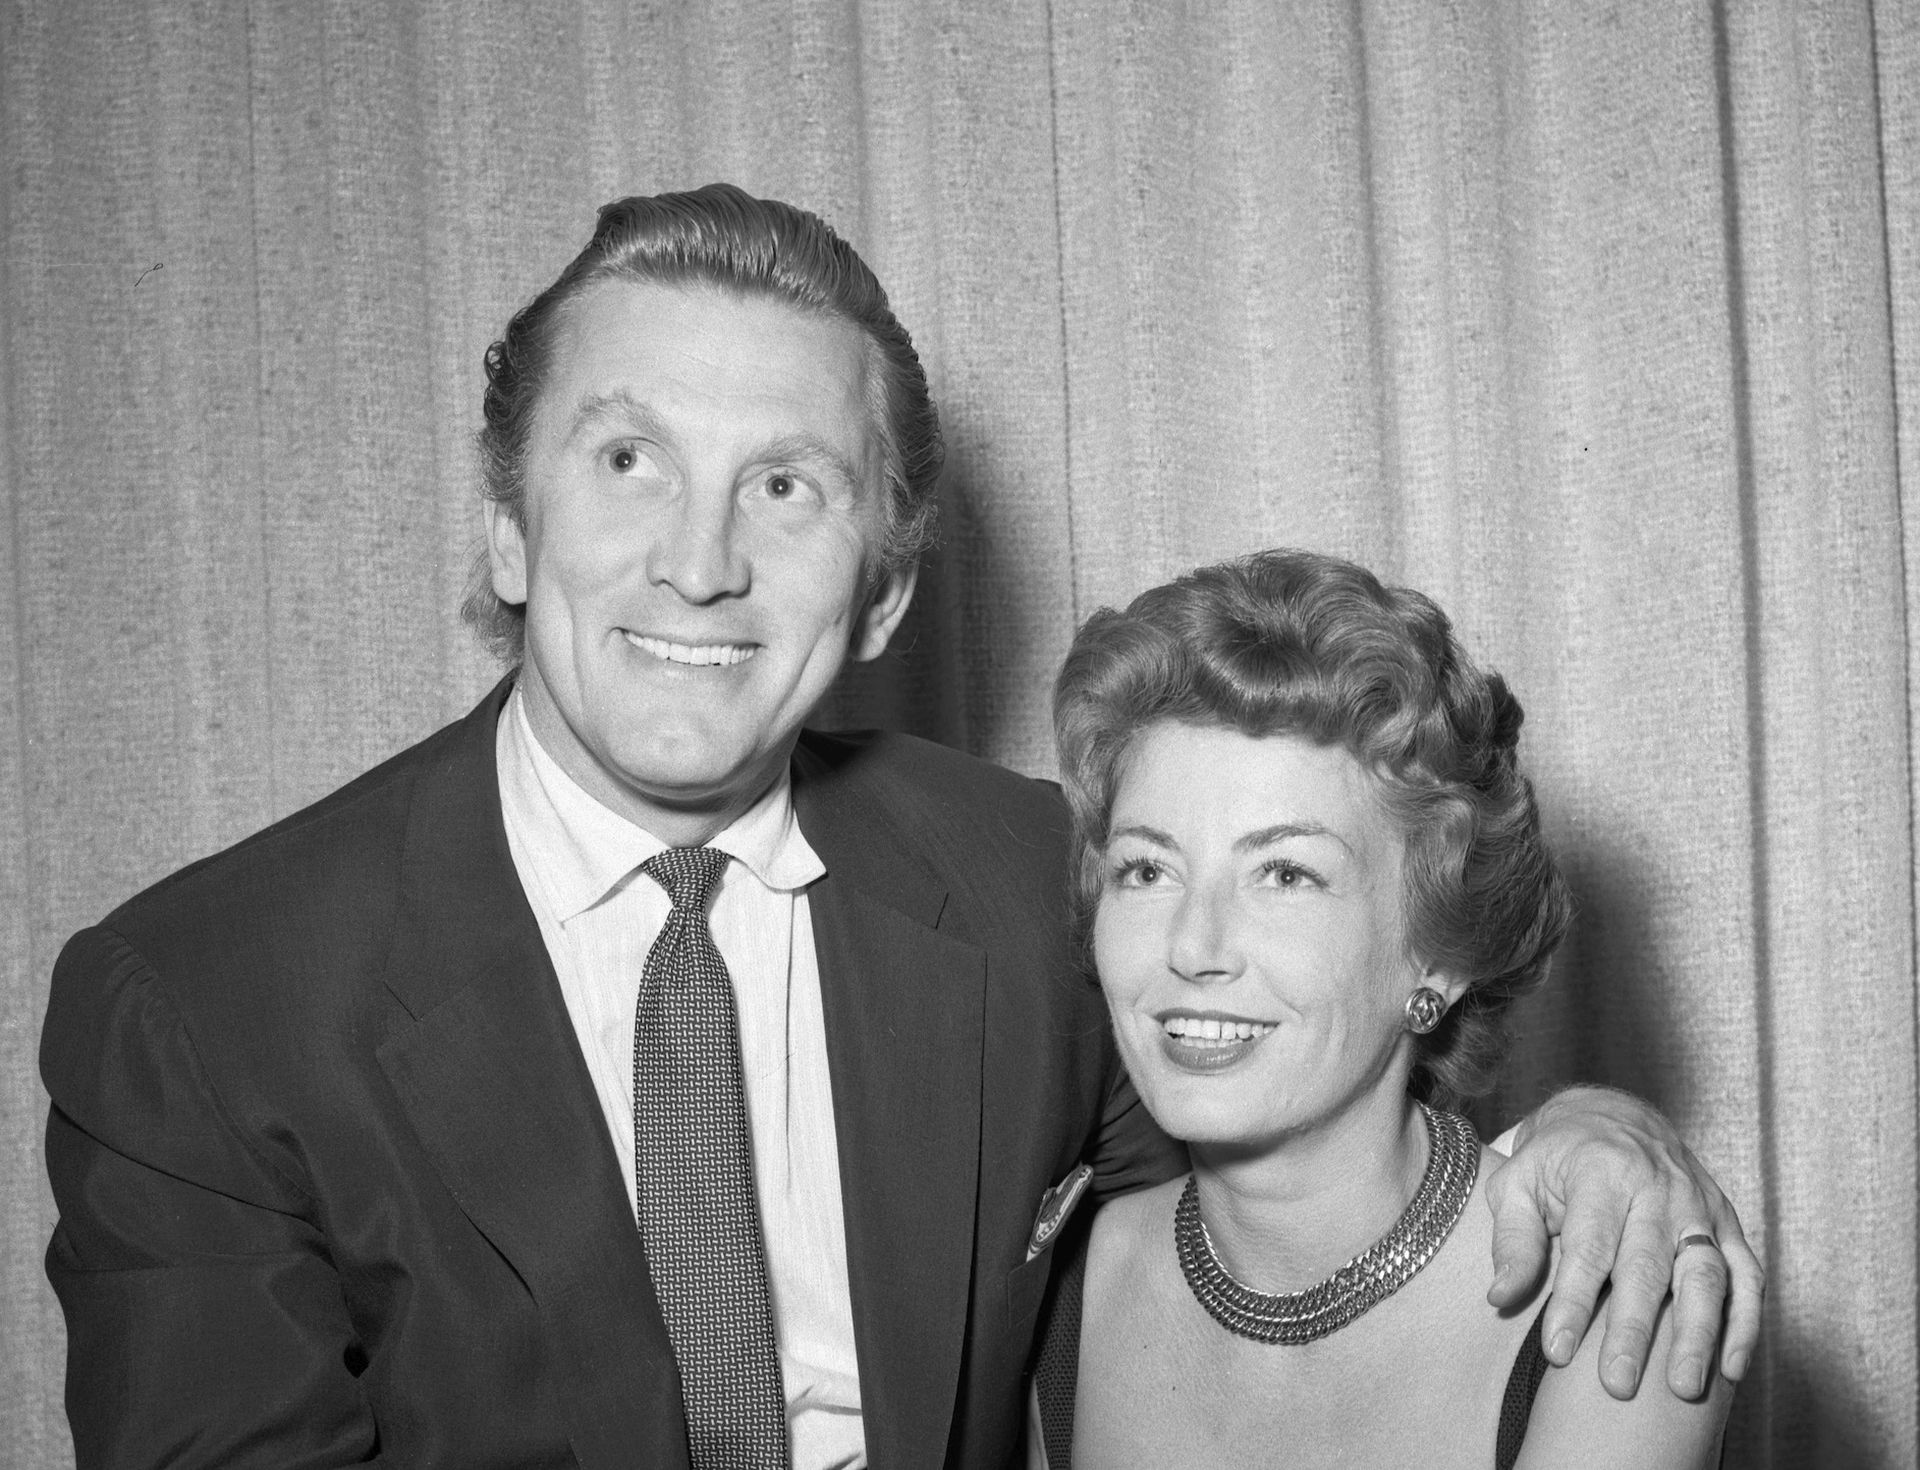 epa08196617 A handout photo made available by the Las Vegas News Bureau on 05 February 2020 shows US actor Kirk Douglas (L) and his wife Anne Buydens (R) posing for wedding photos at the Sahara Hotel in Las Vegas, Nevada, 30 May 1954. According to media reports, US actor Kirk Douglas died at the age of 103 on 05 February 2020.  EPA/LAS VEGAS NEWS BUREAU / HANDOUT HANDOUT FOR EDITORIAL USE ONLY: Mandatory Credit: Las Vegas News Bureau via european pressphoto agency HANDOUT EDITORIAL USE ONLY/NO SALES